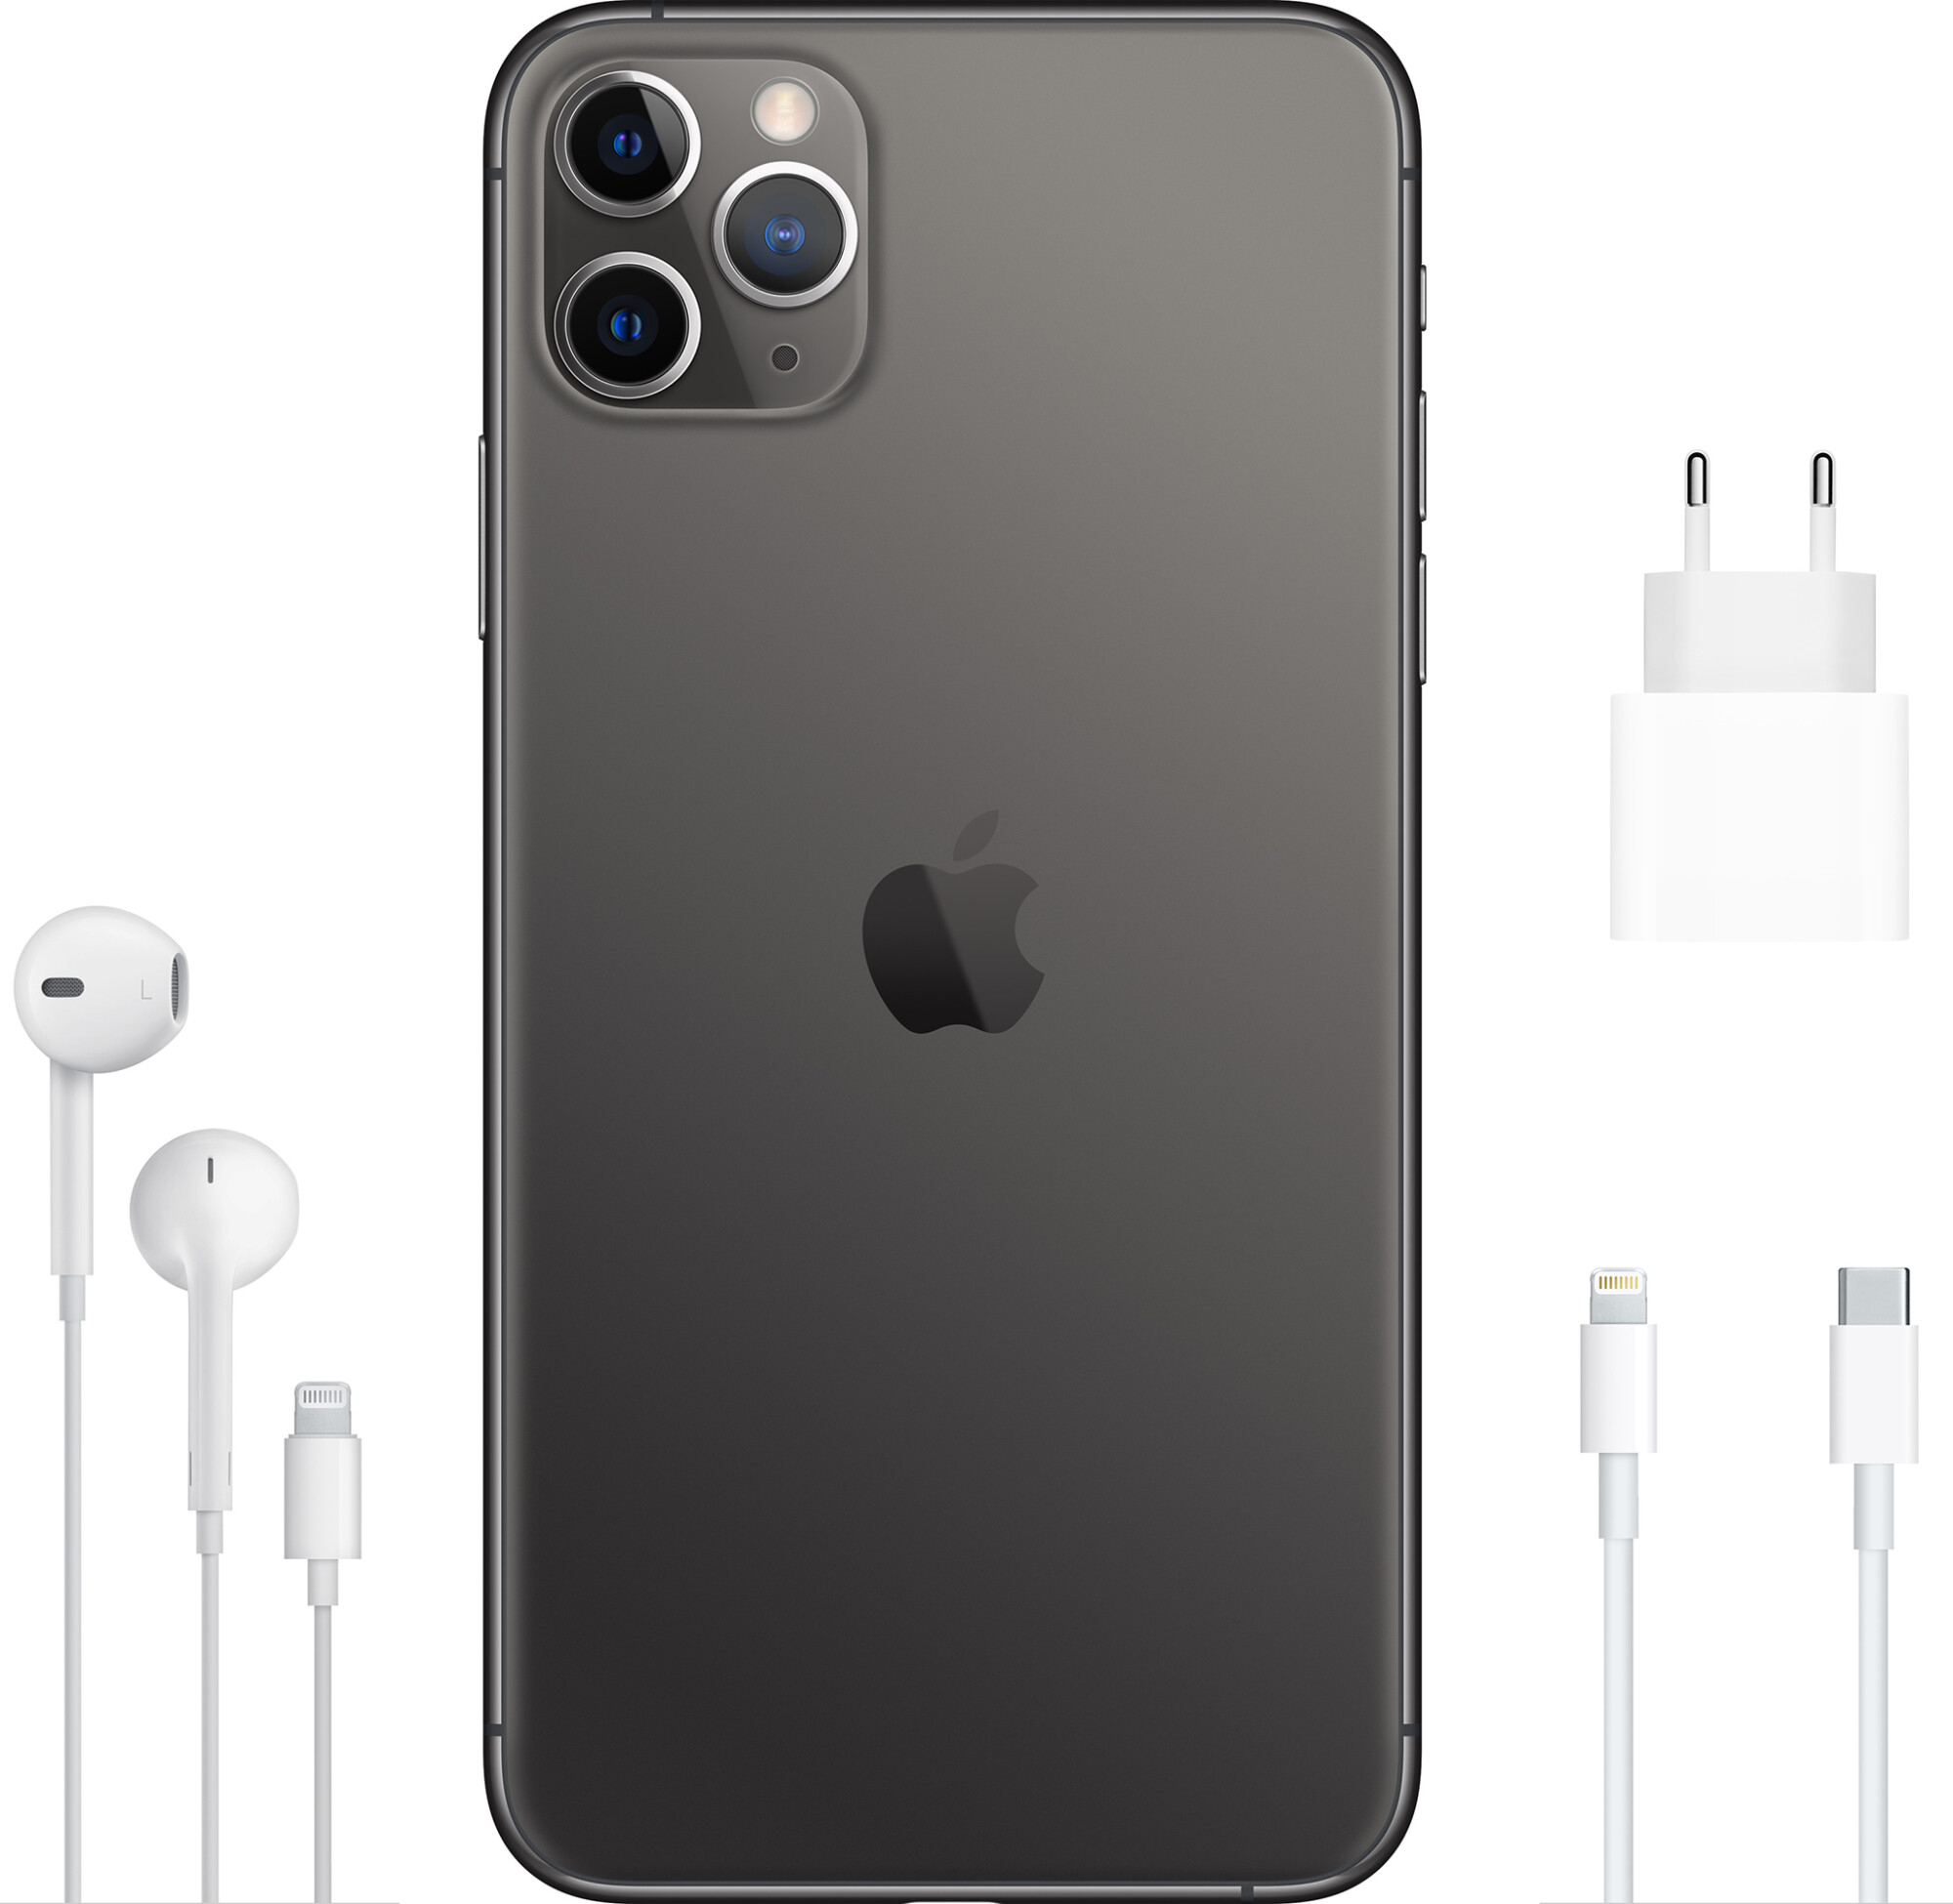  Apple iPhone 11 Pro Max 512GB Space Gray (MWH82)